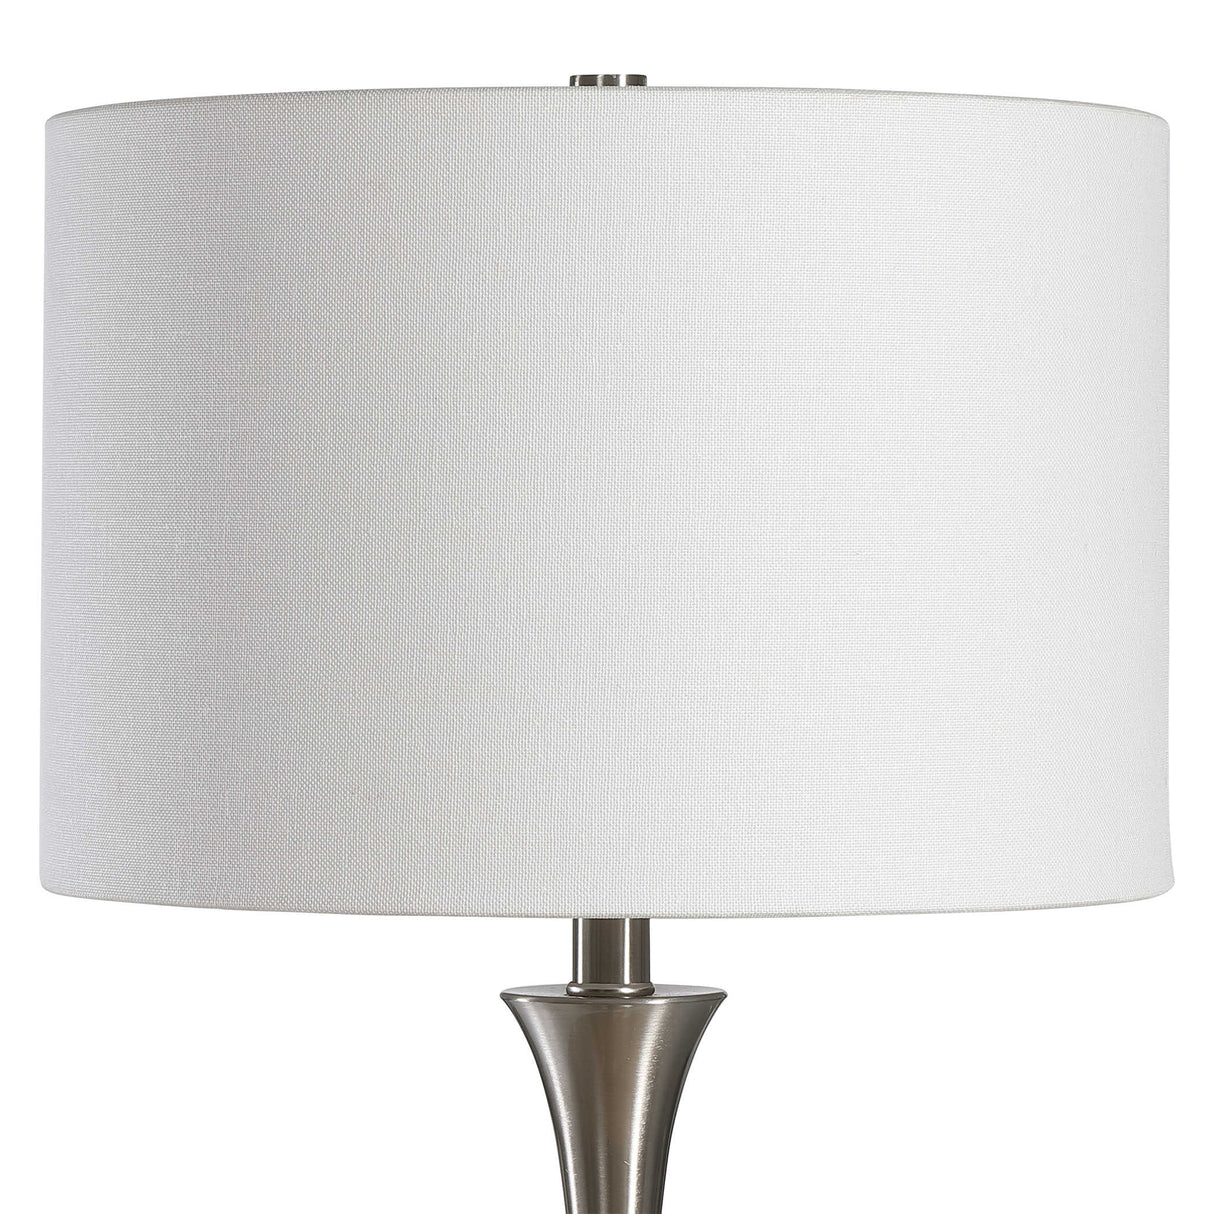 Pitman Table Lamp - Pickup Only